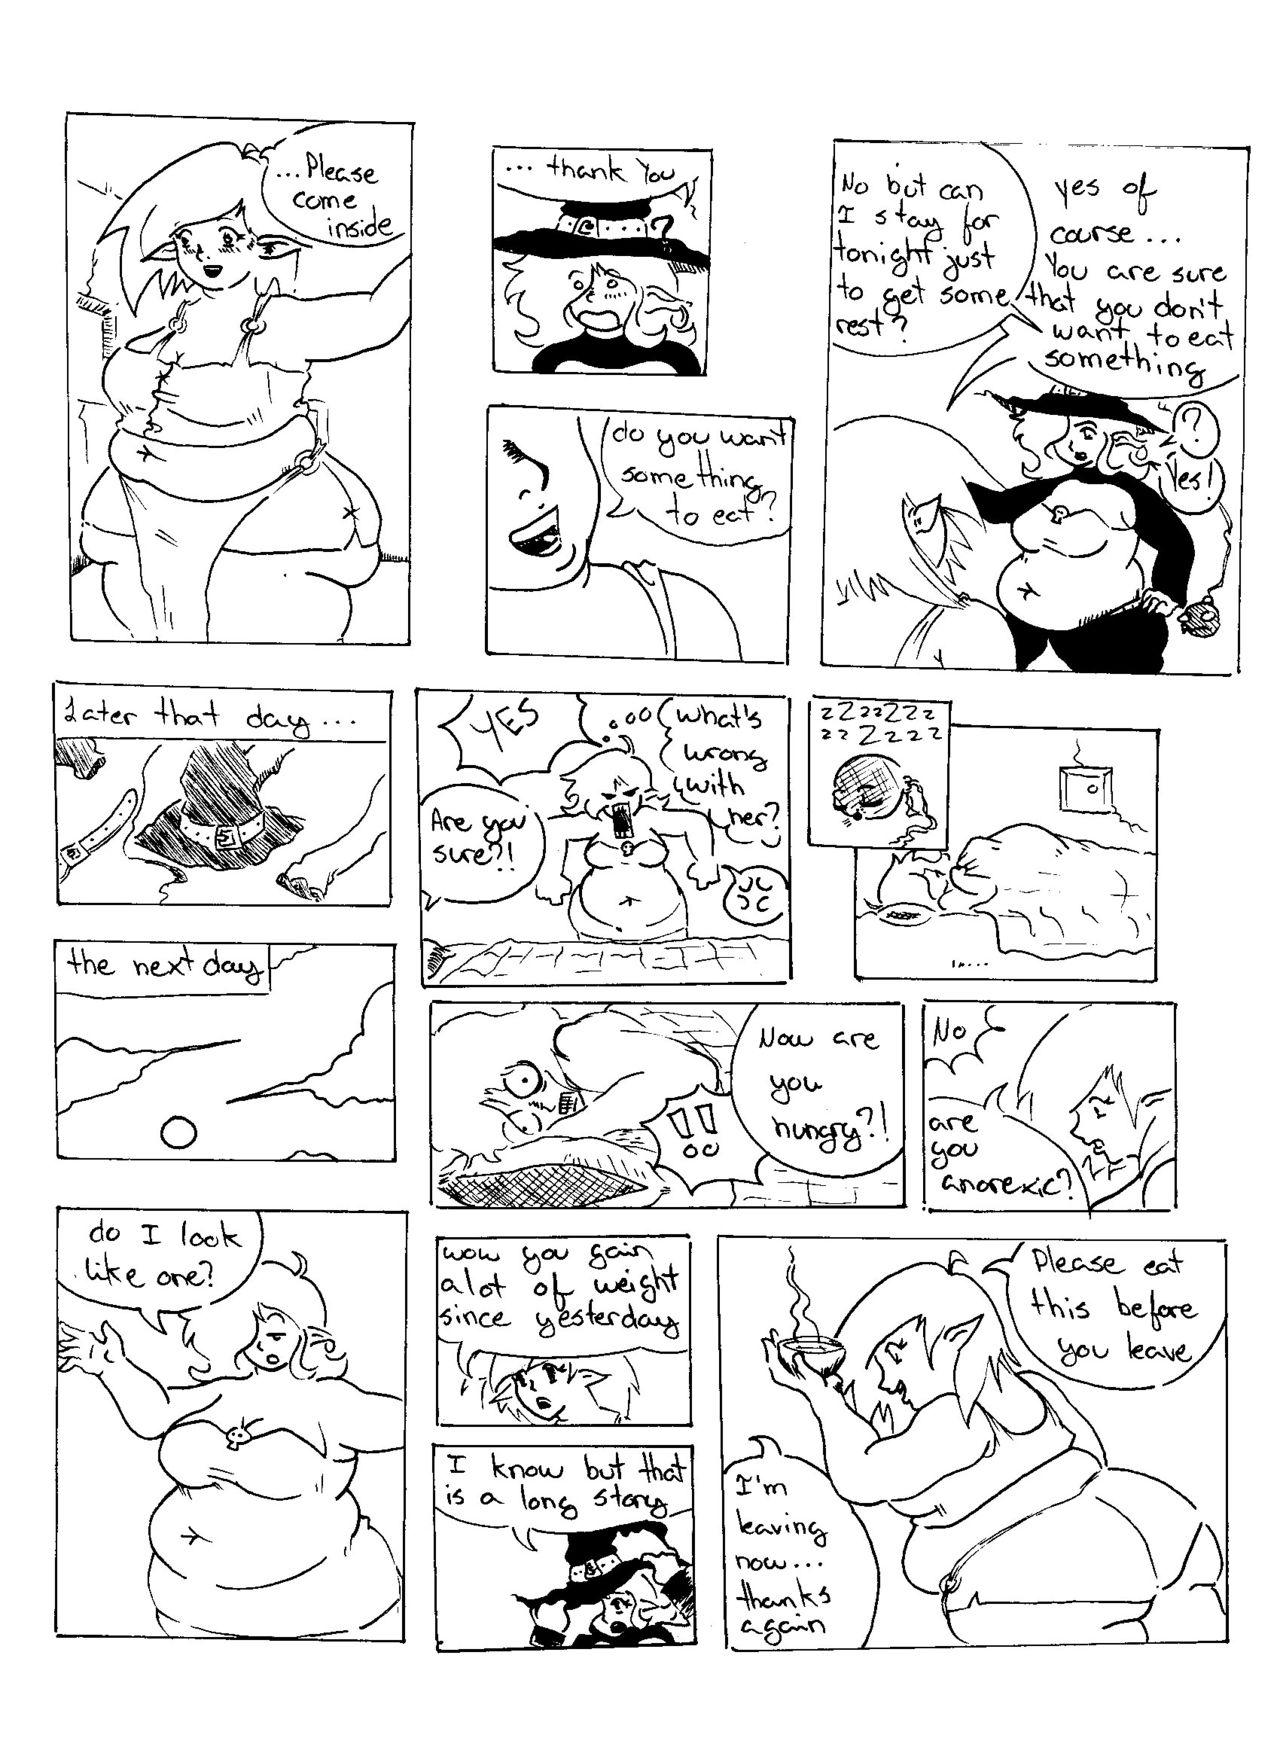 Made fat witch Bear - Page 10